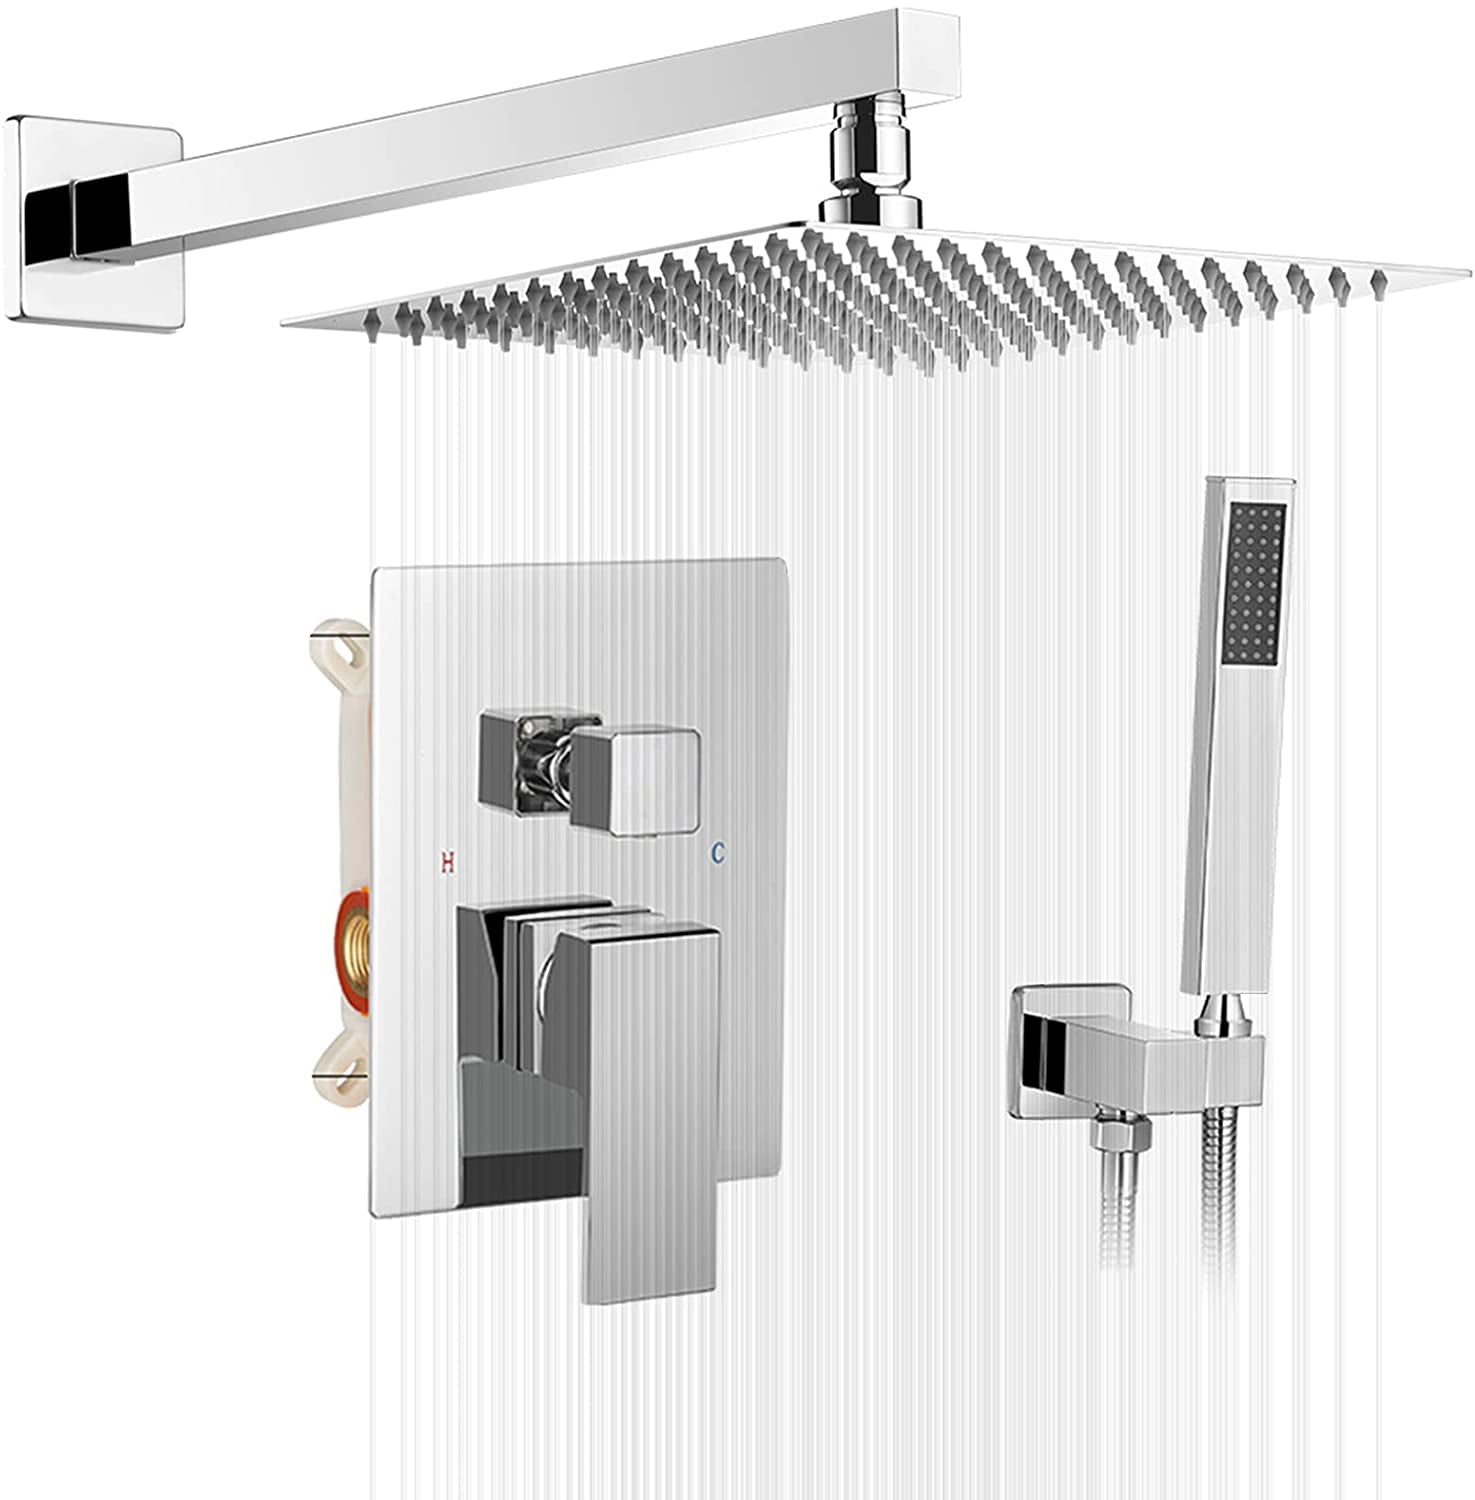 Details about   20 Inch LED Ultra Thin Chrome Shower Head Square Rainfall Spout Valve Mixer Tap 